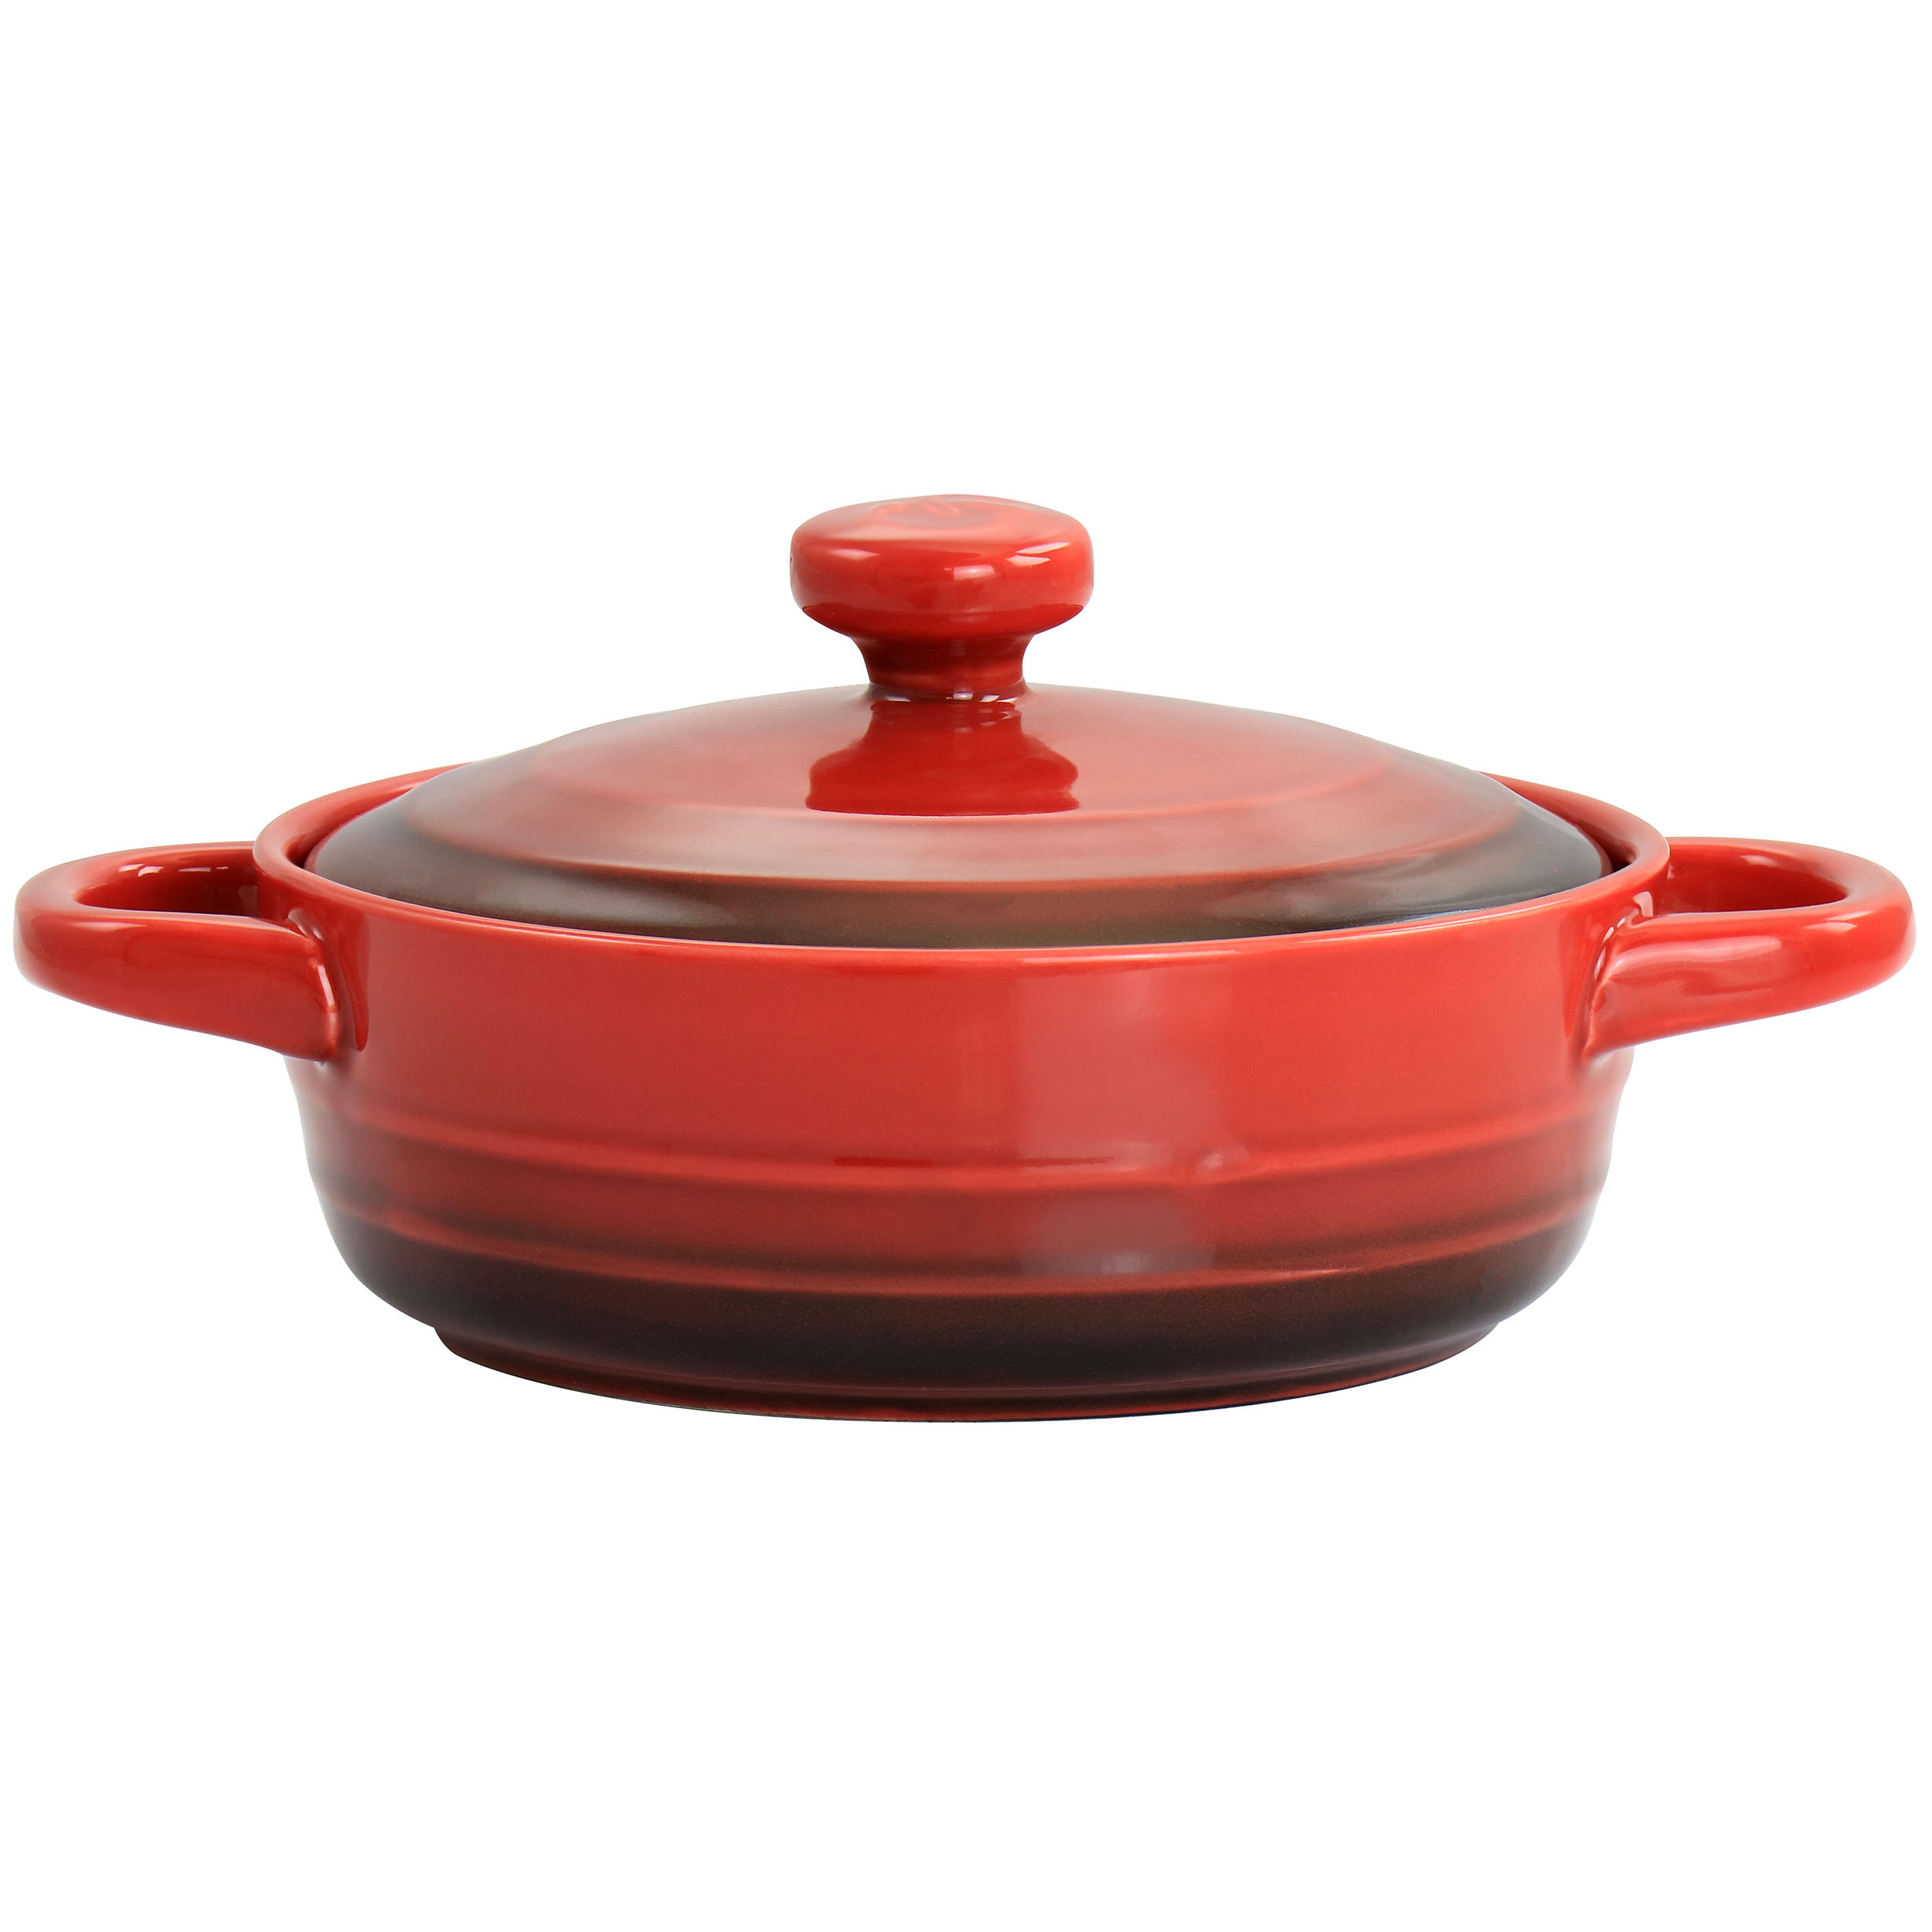 Crockpot Appleton 2 Quart Oval Stoneware Casserole Dish In Red With Glass  Lid